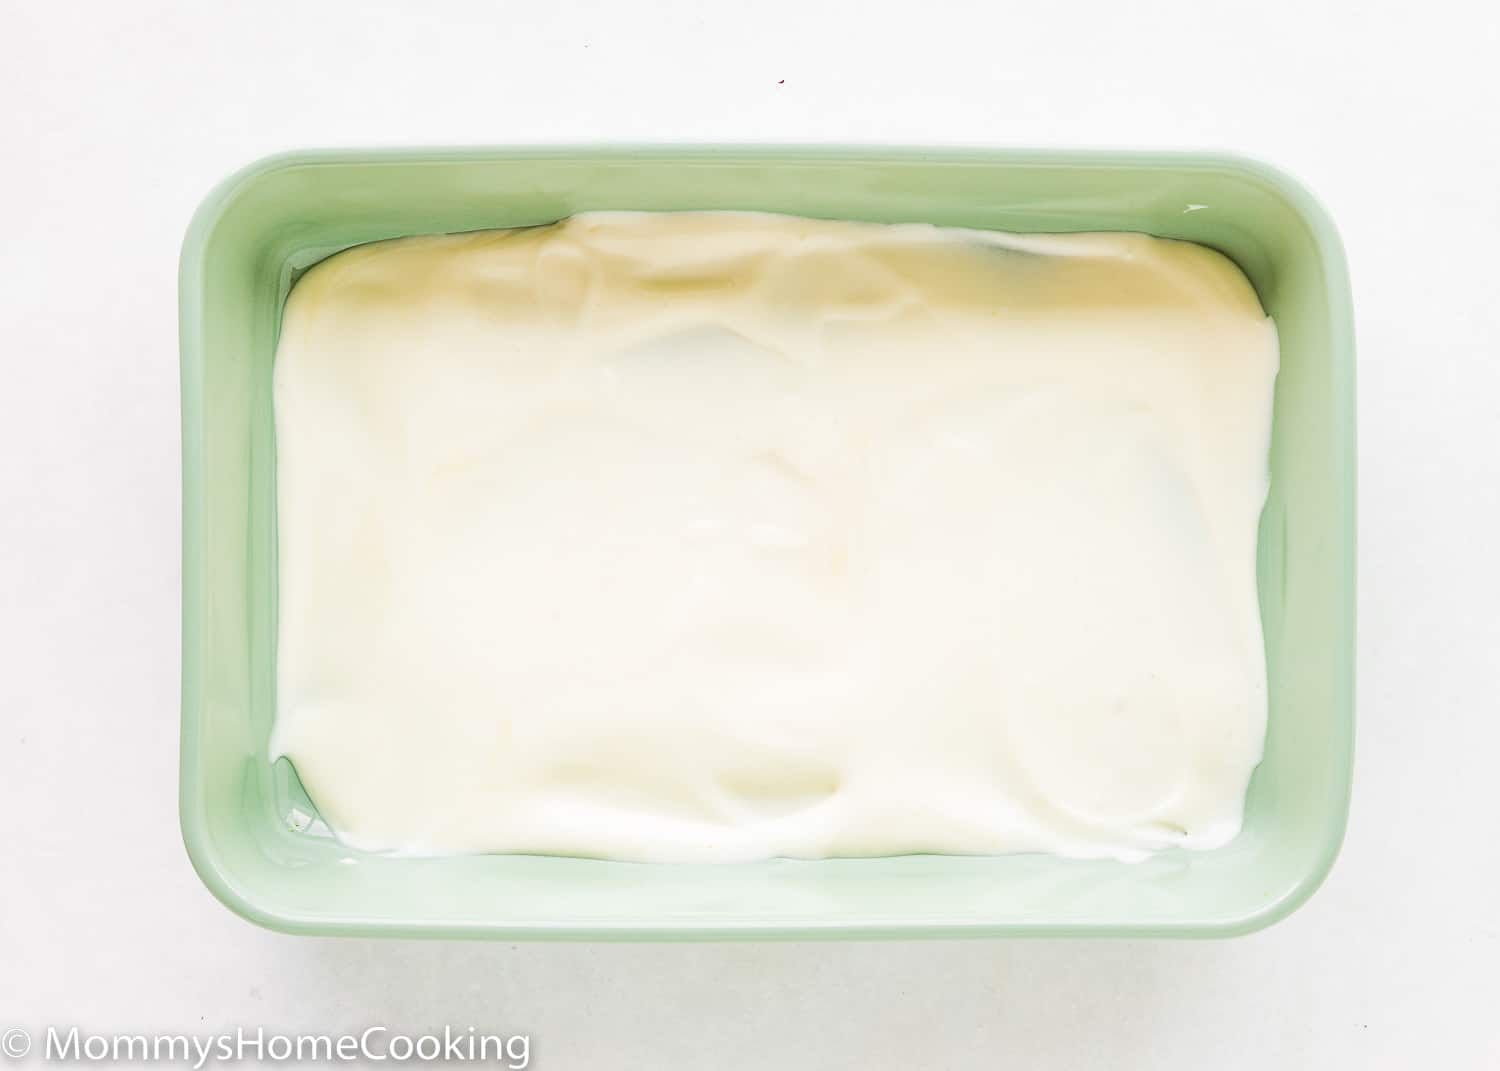 A rectangular green dish with pudding on the bottom.